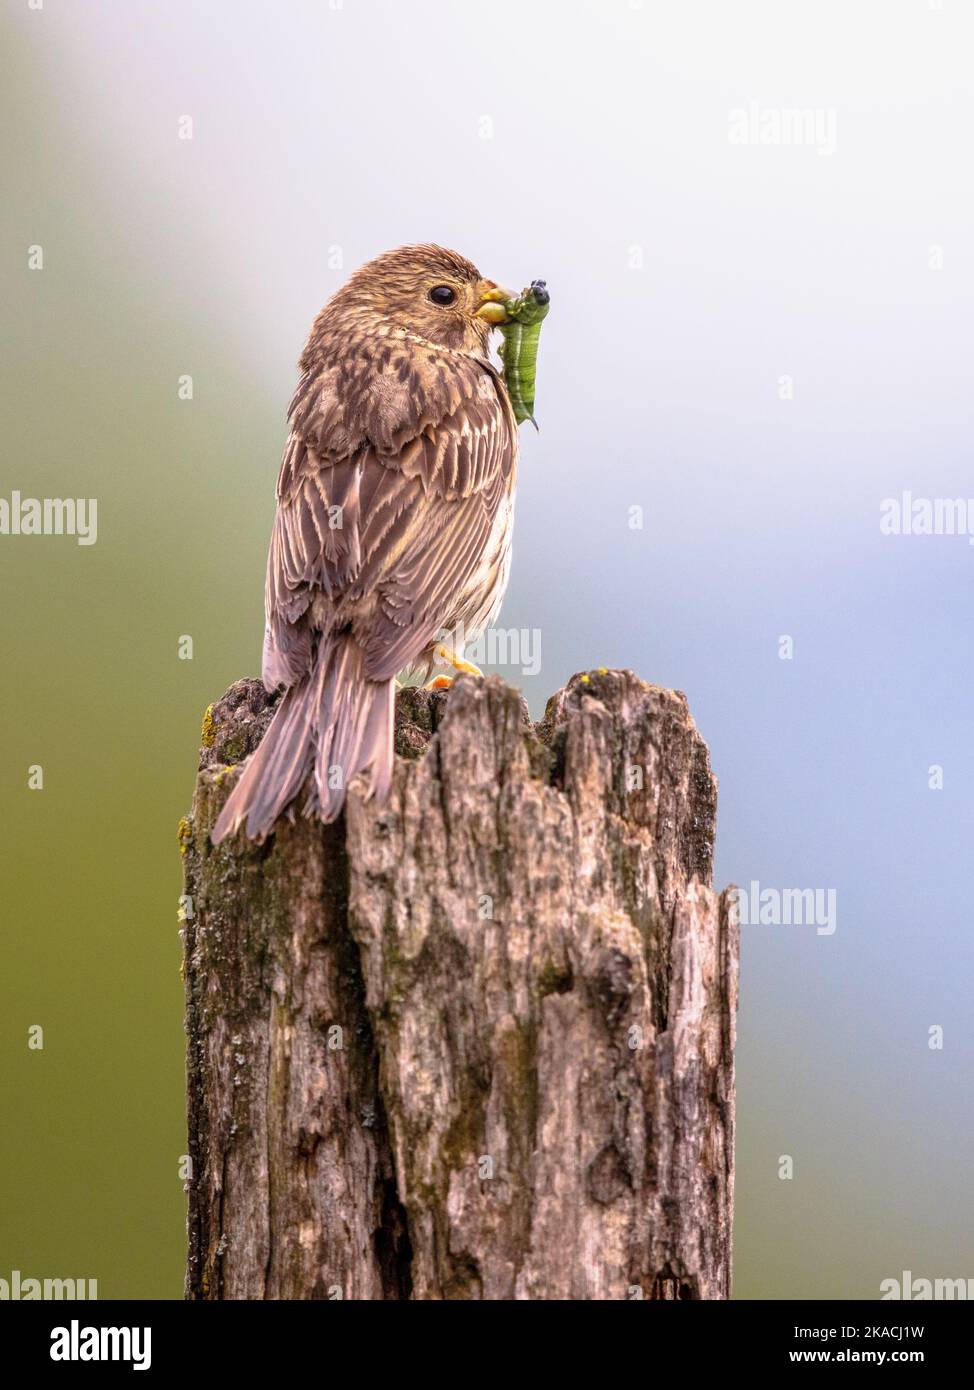 Corn bunting (Emberiza calandra) Perched on Pole on bright background with caterpillar in beak. This bird is common in agricultural landscapes in Sout Stock Photo